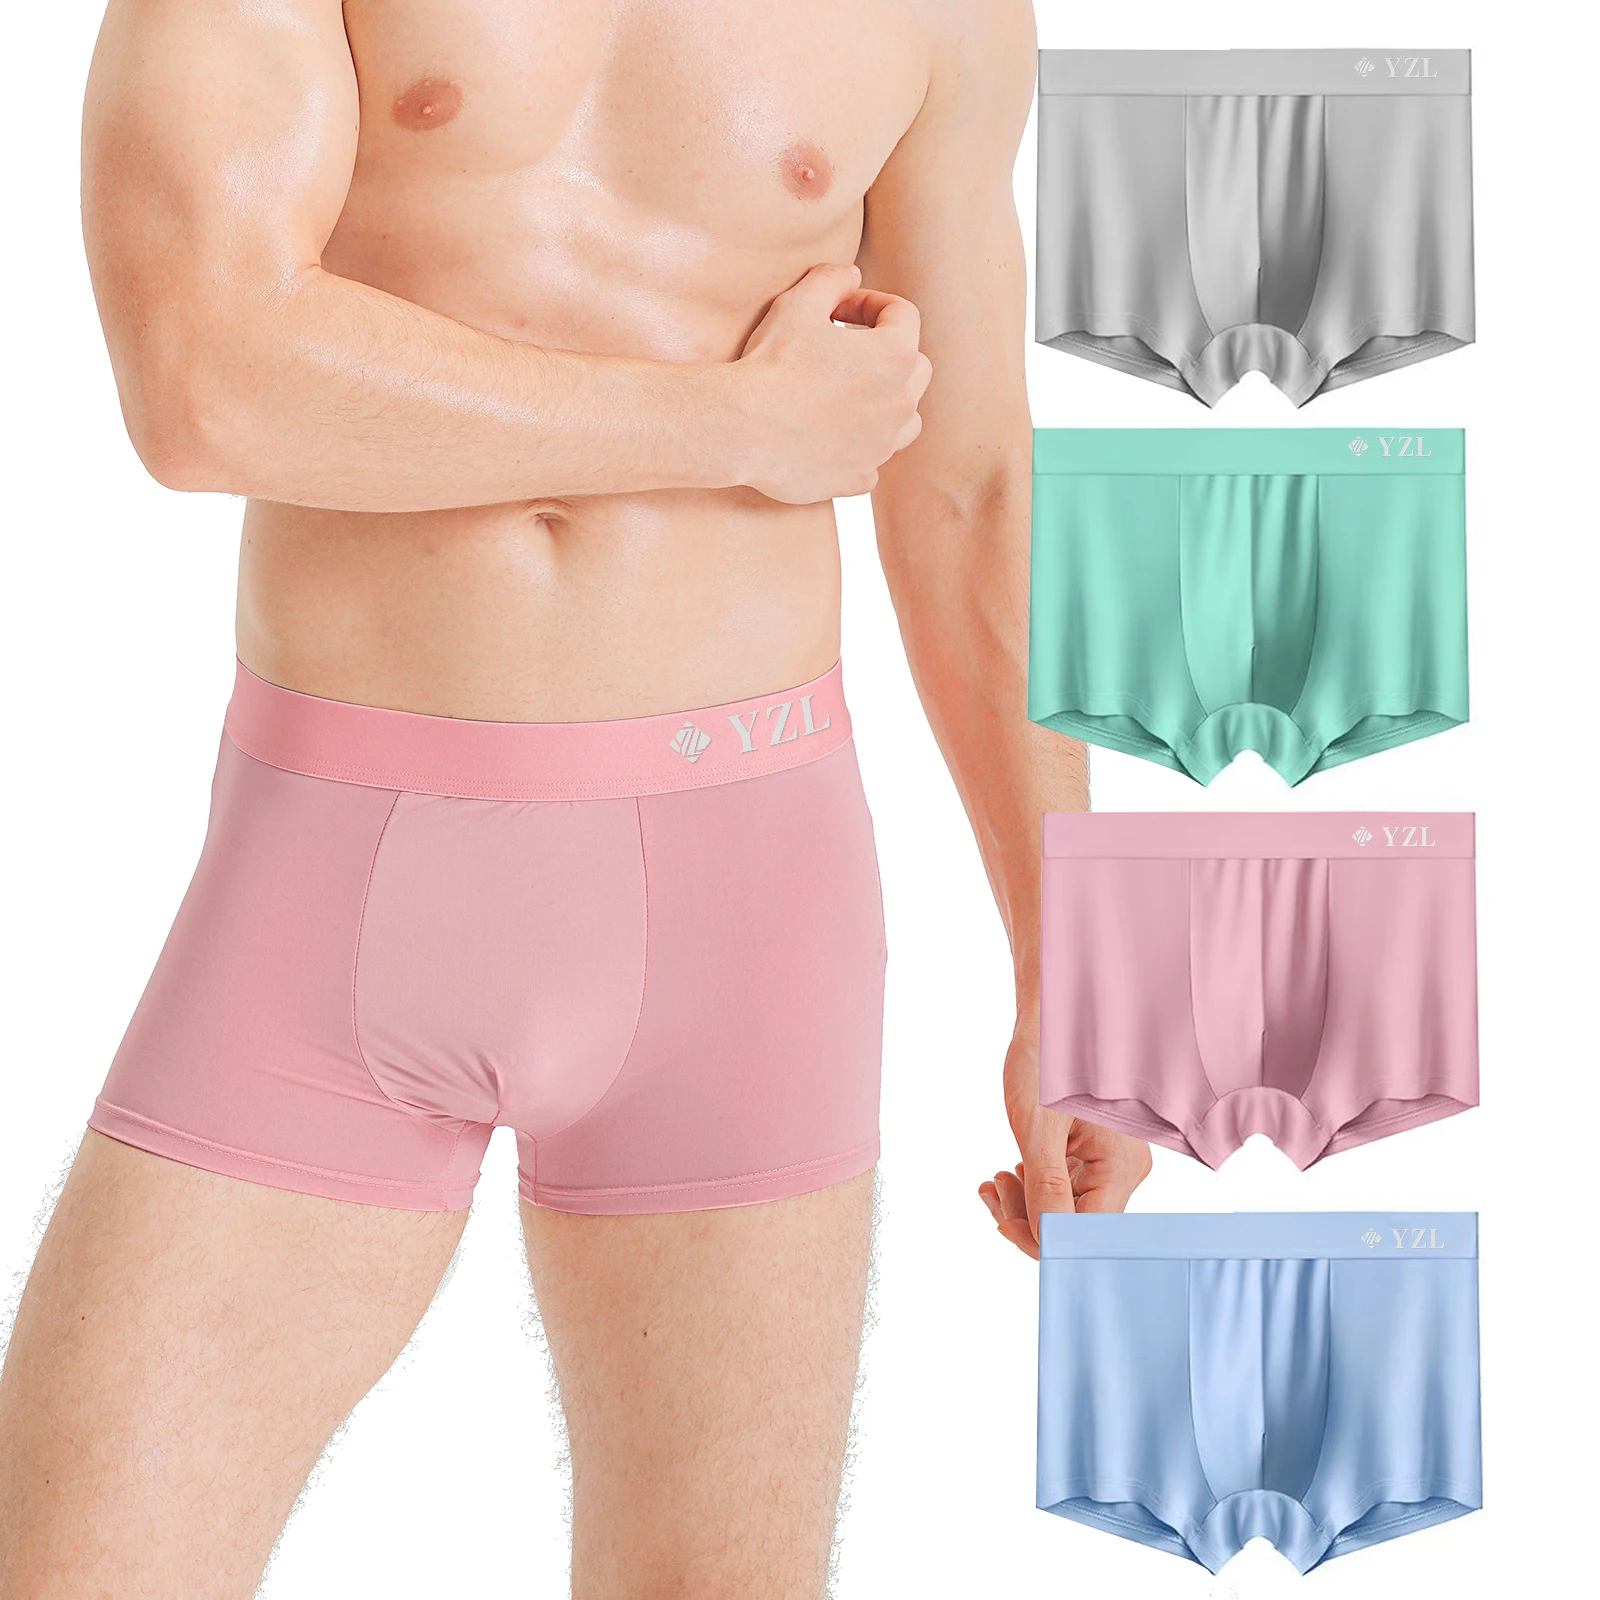 Men's Underwear ice Silk Flat Corner Shorts pants Summer Thin Antibacterial Modal Large Boys' Seamless Top Quality with Gift Box 500g wall repair roller antibacterial wall paint waterbasd repair net with rollinsmell household latex paint white small roller